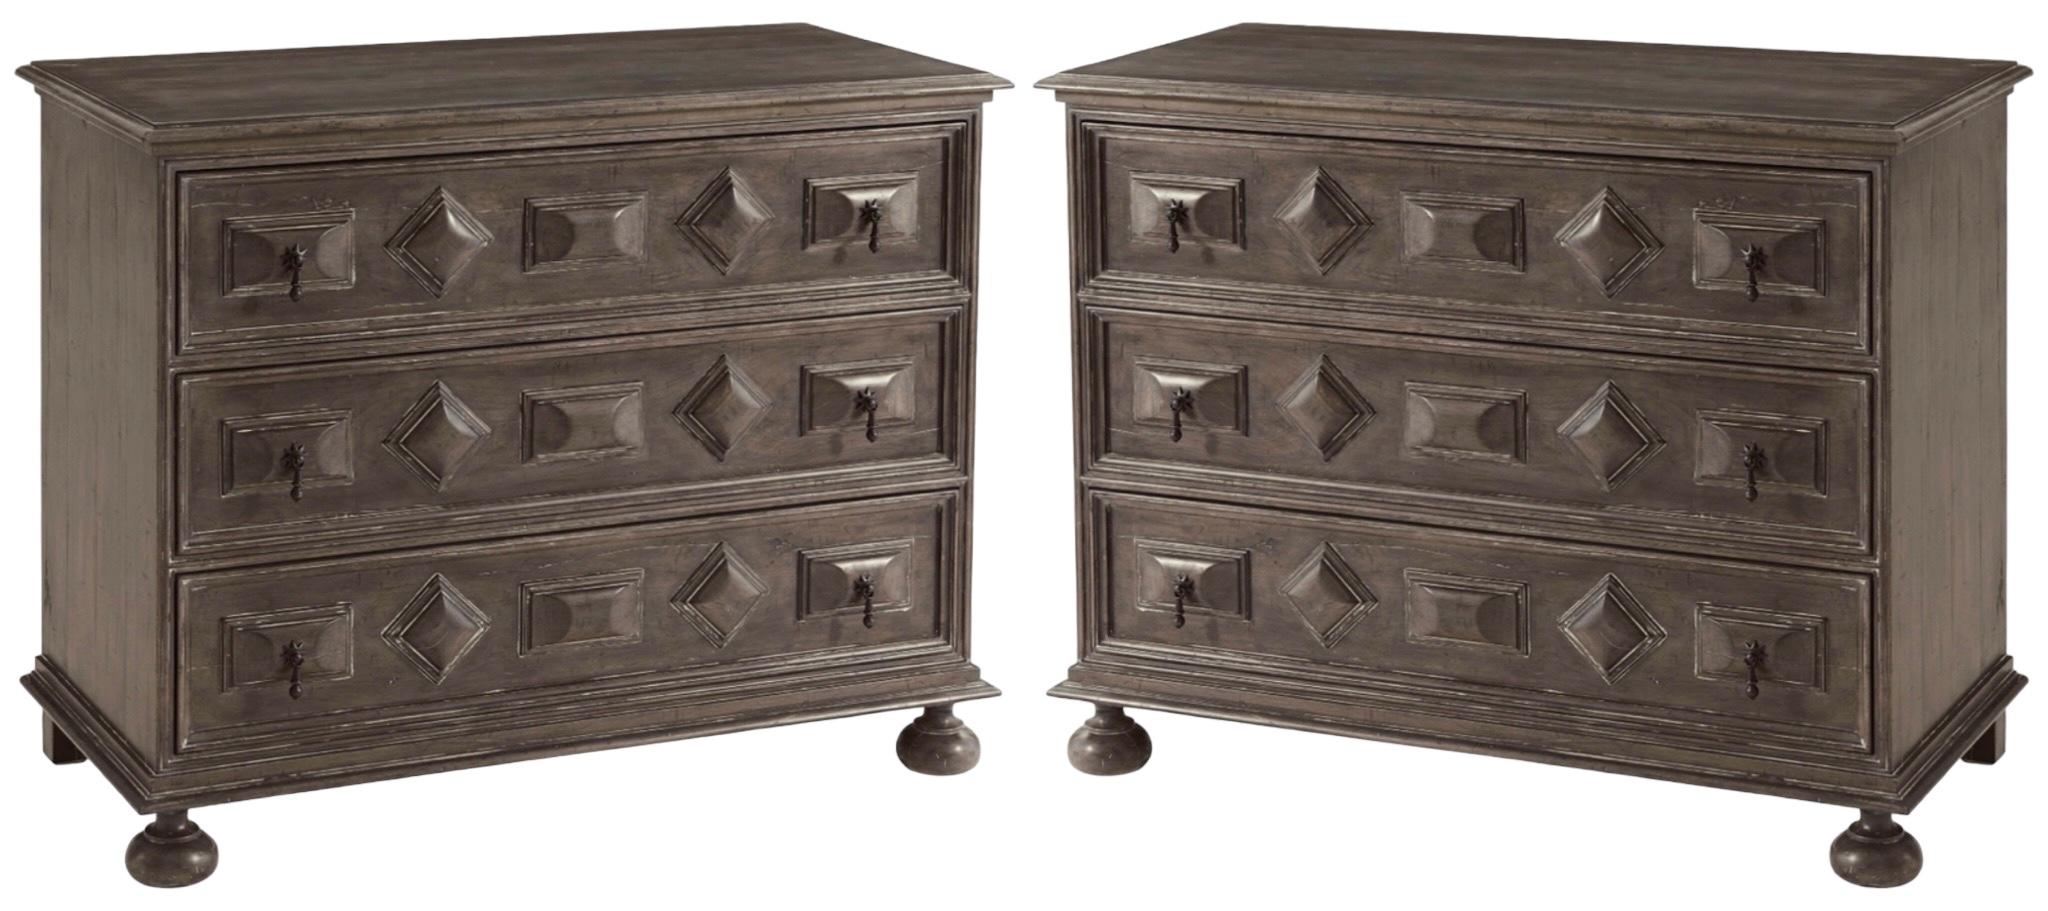 Contemporary Theodore Alexander Jacobean Style Carved Alder And Brass Chests / Commode -Pair For Sale